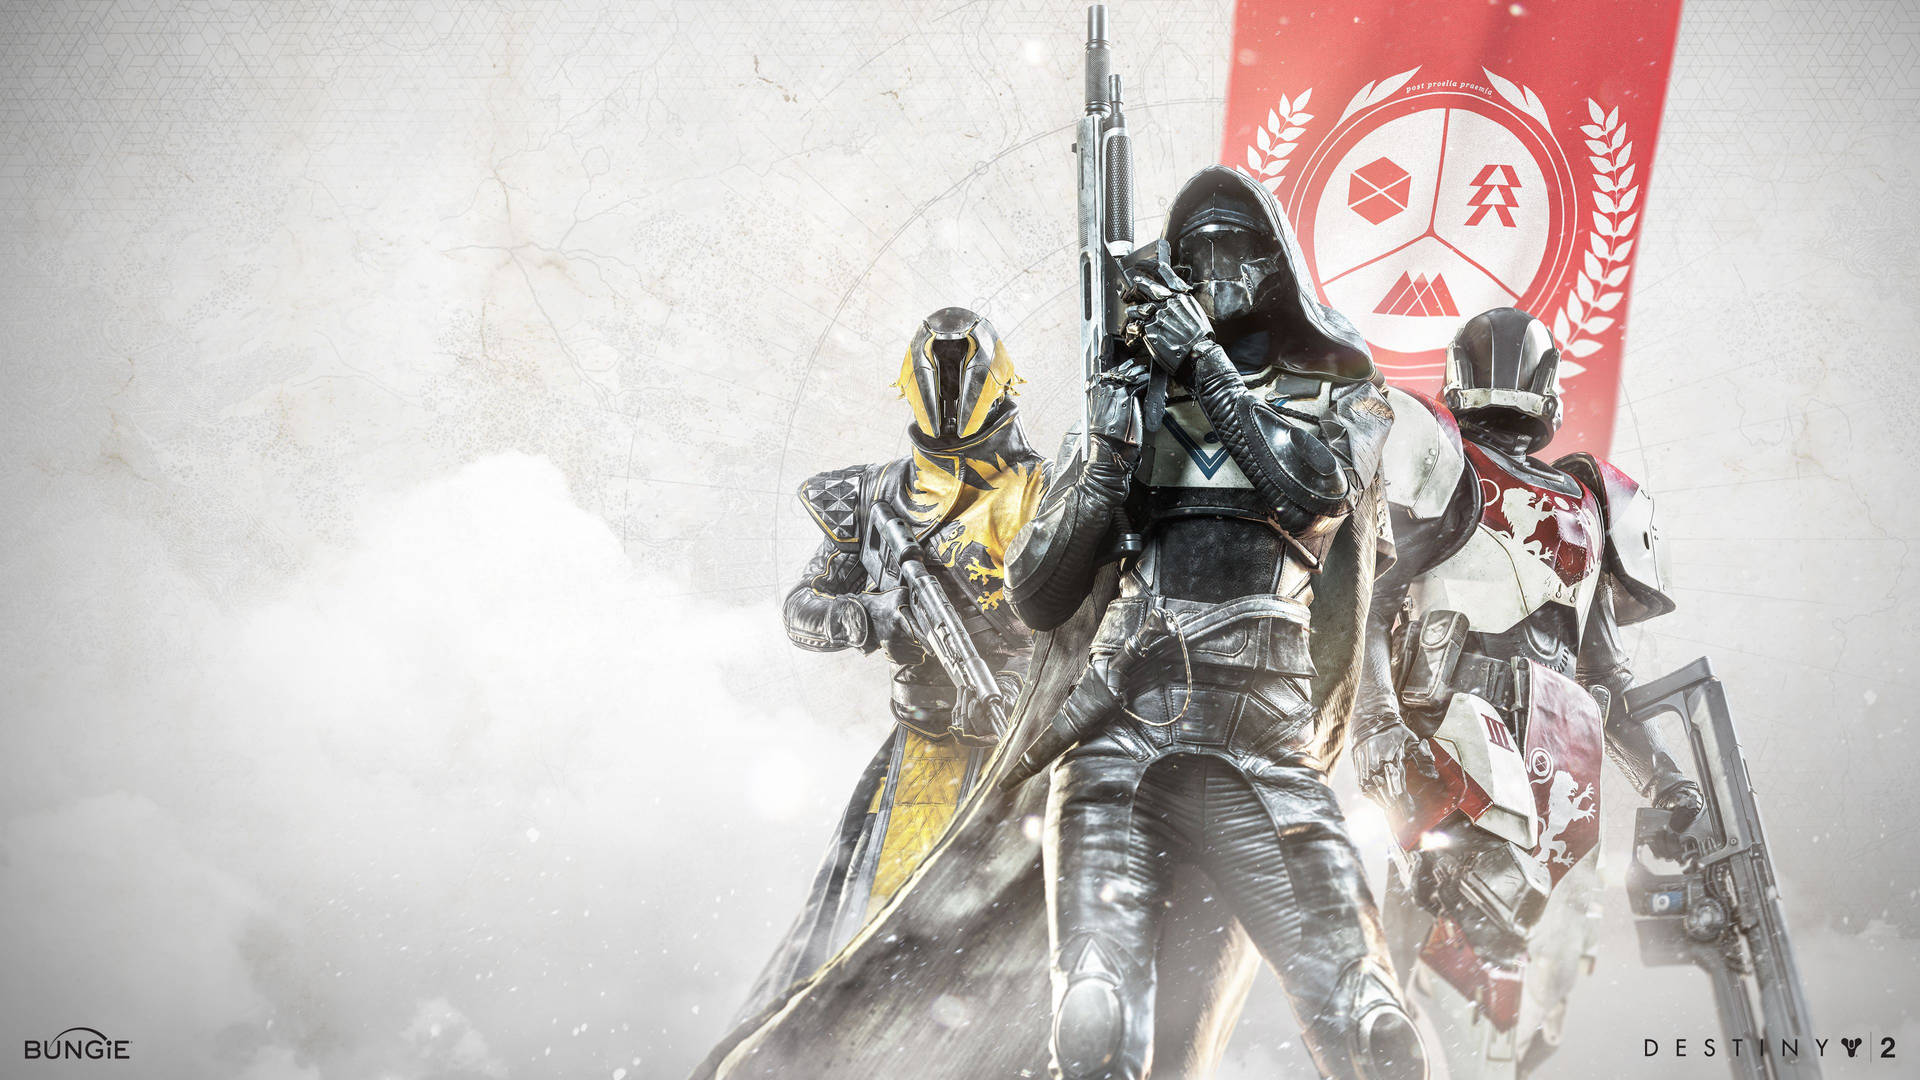 3840X2160 Destiny 2 Wallpaper and Background